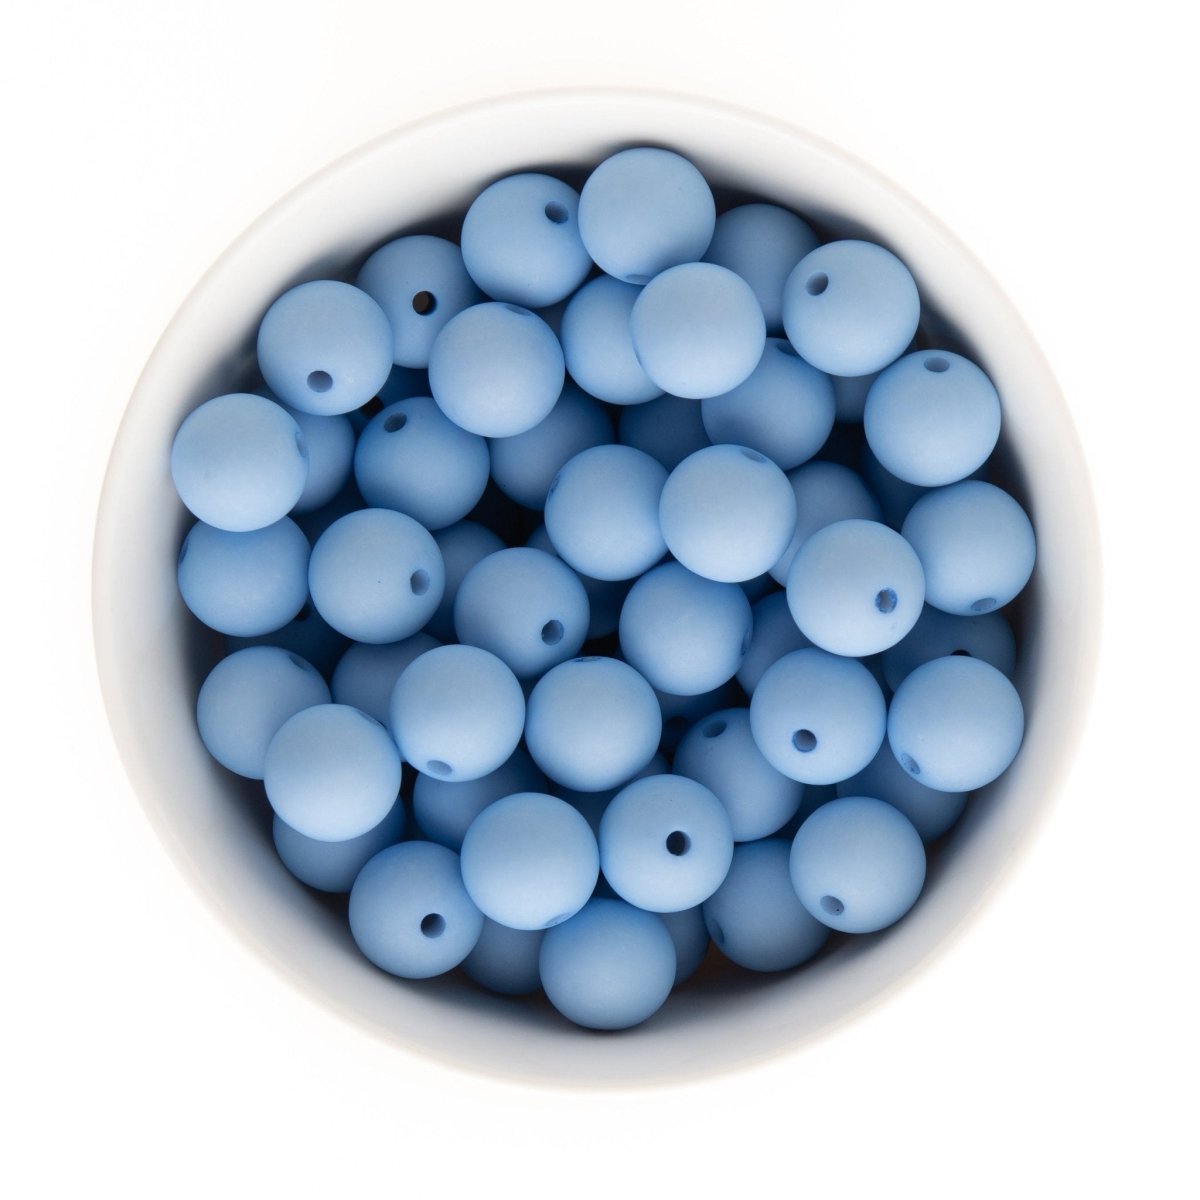 Acrylic Round Beads Matte Solid 16mm Light Blue from Cara & Co Craft Supply